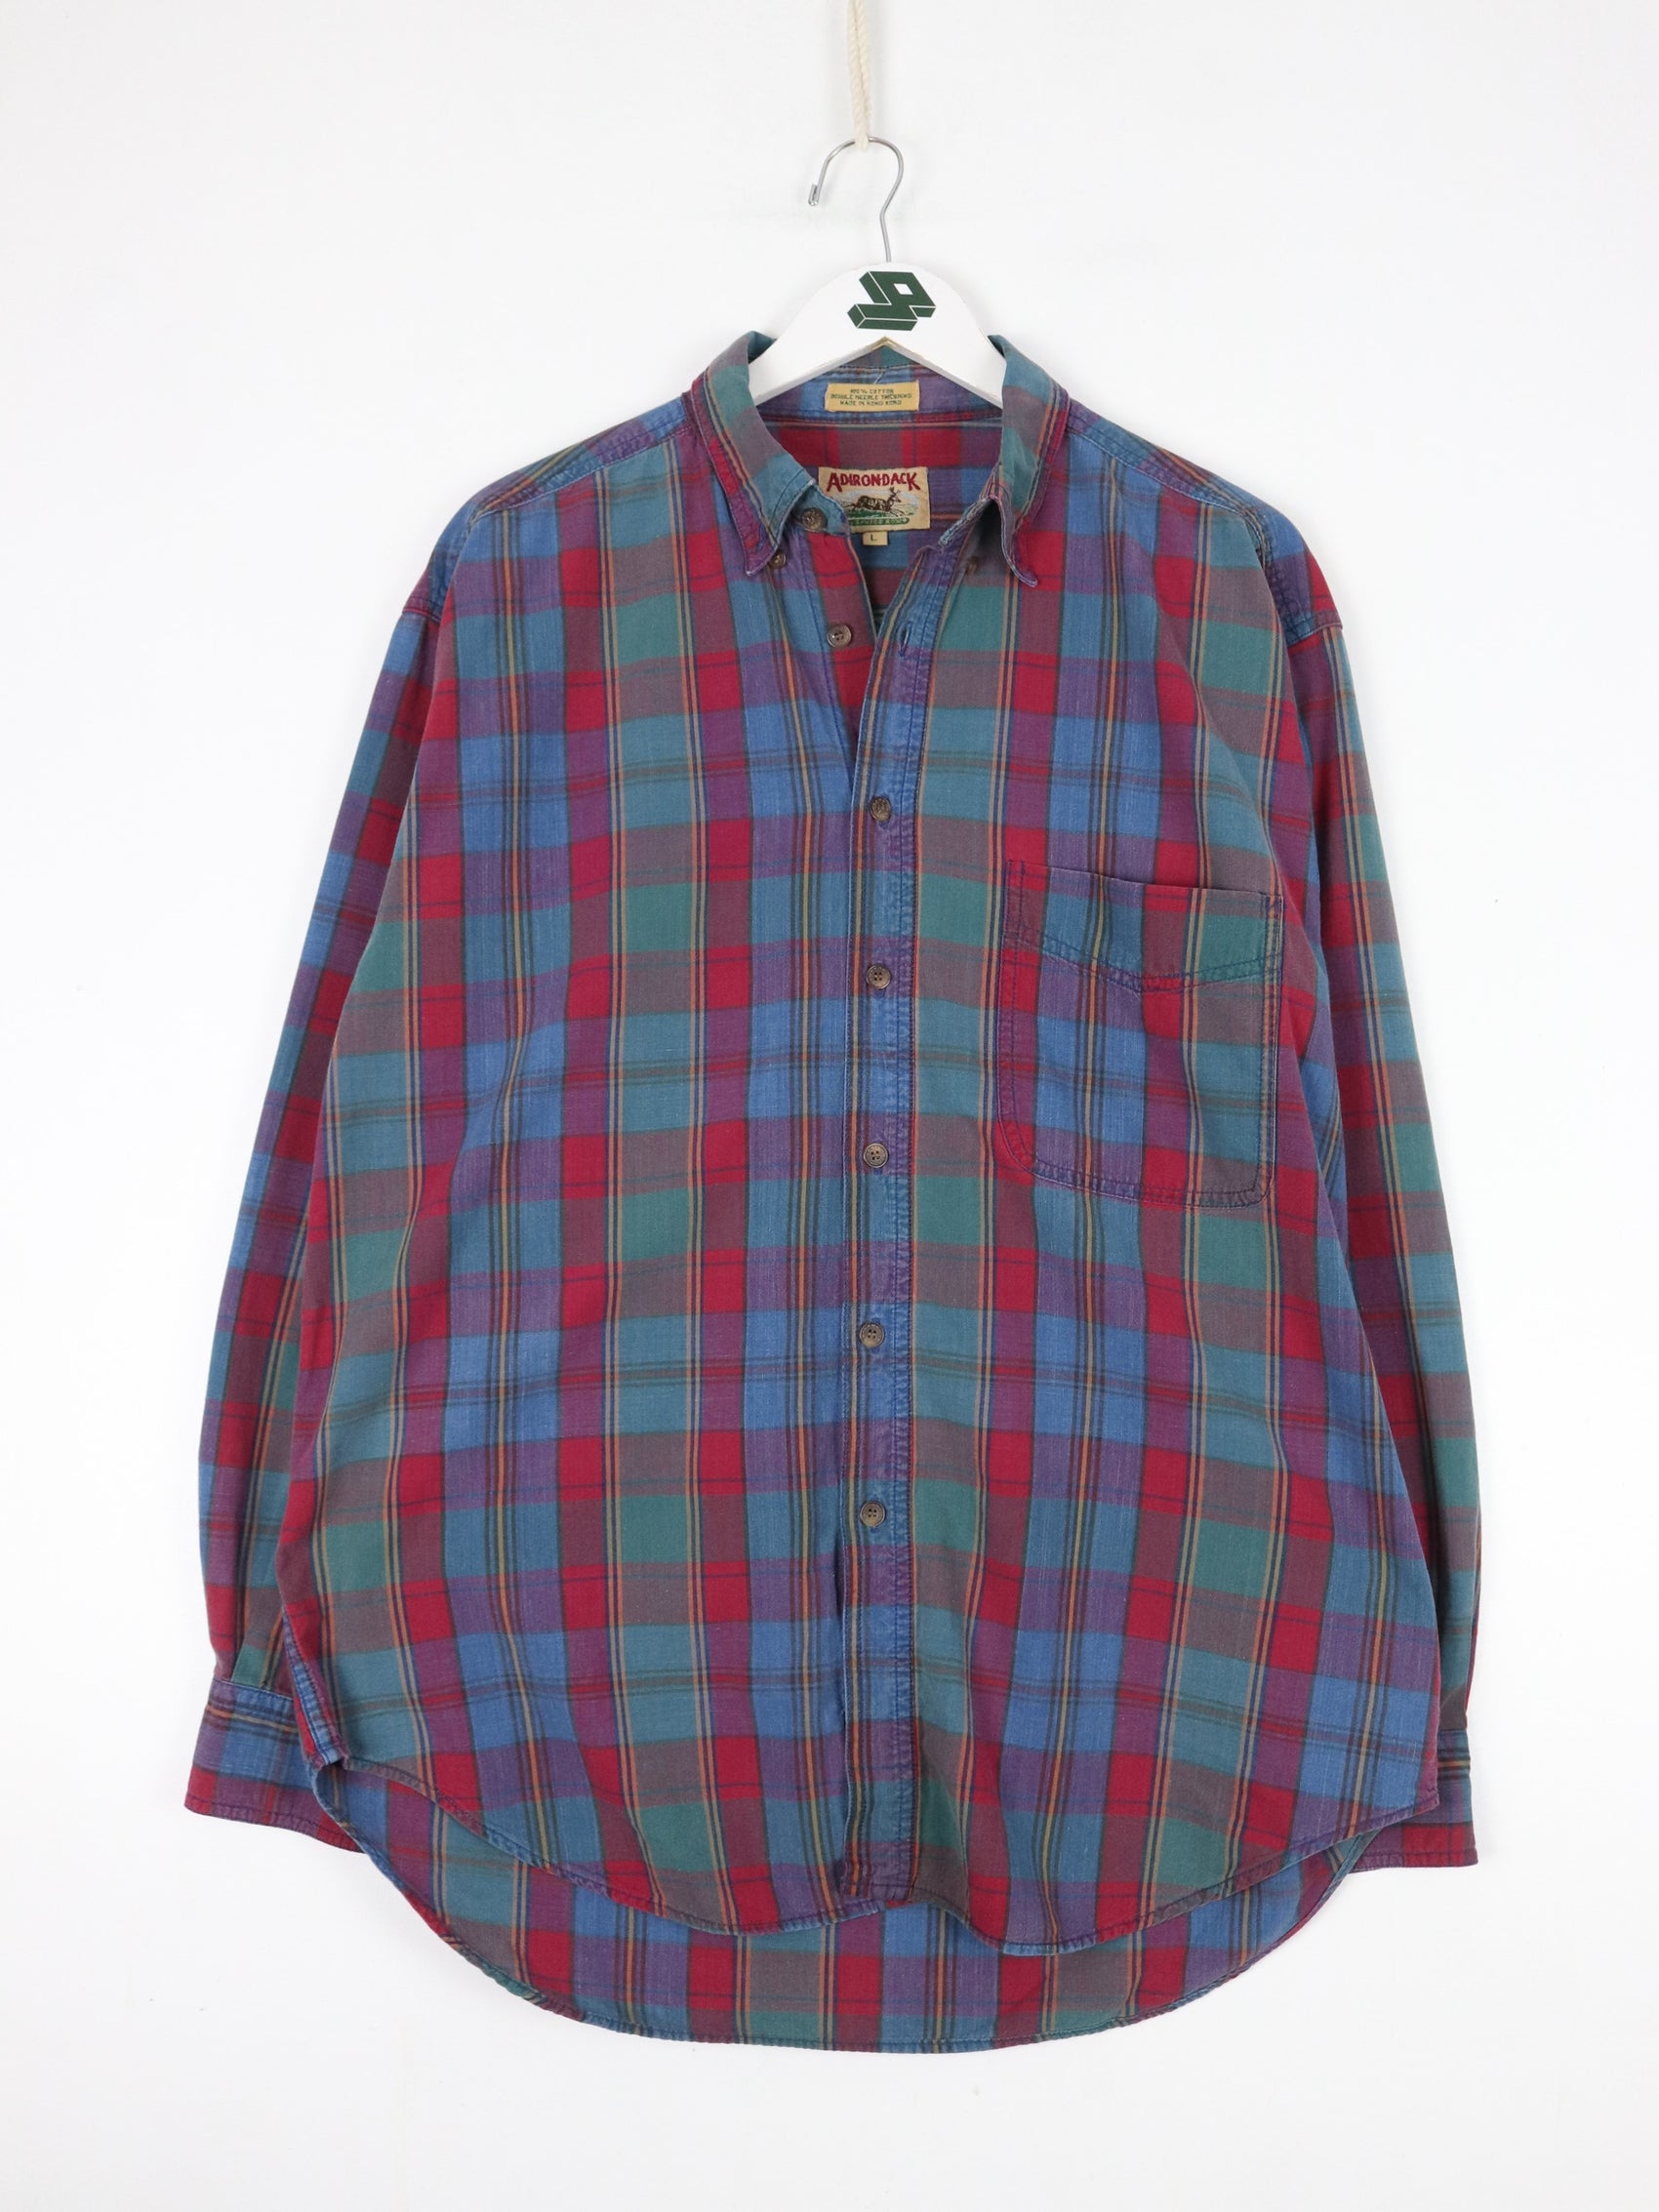 Adirondack Shirt Mens Large Blue Red Button Up